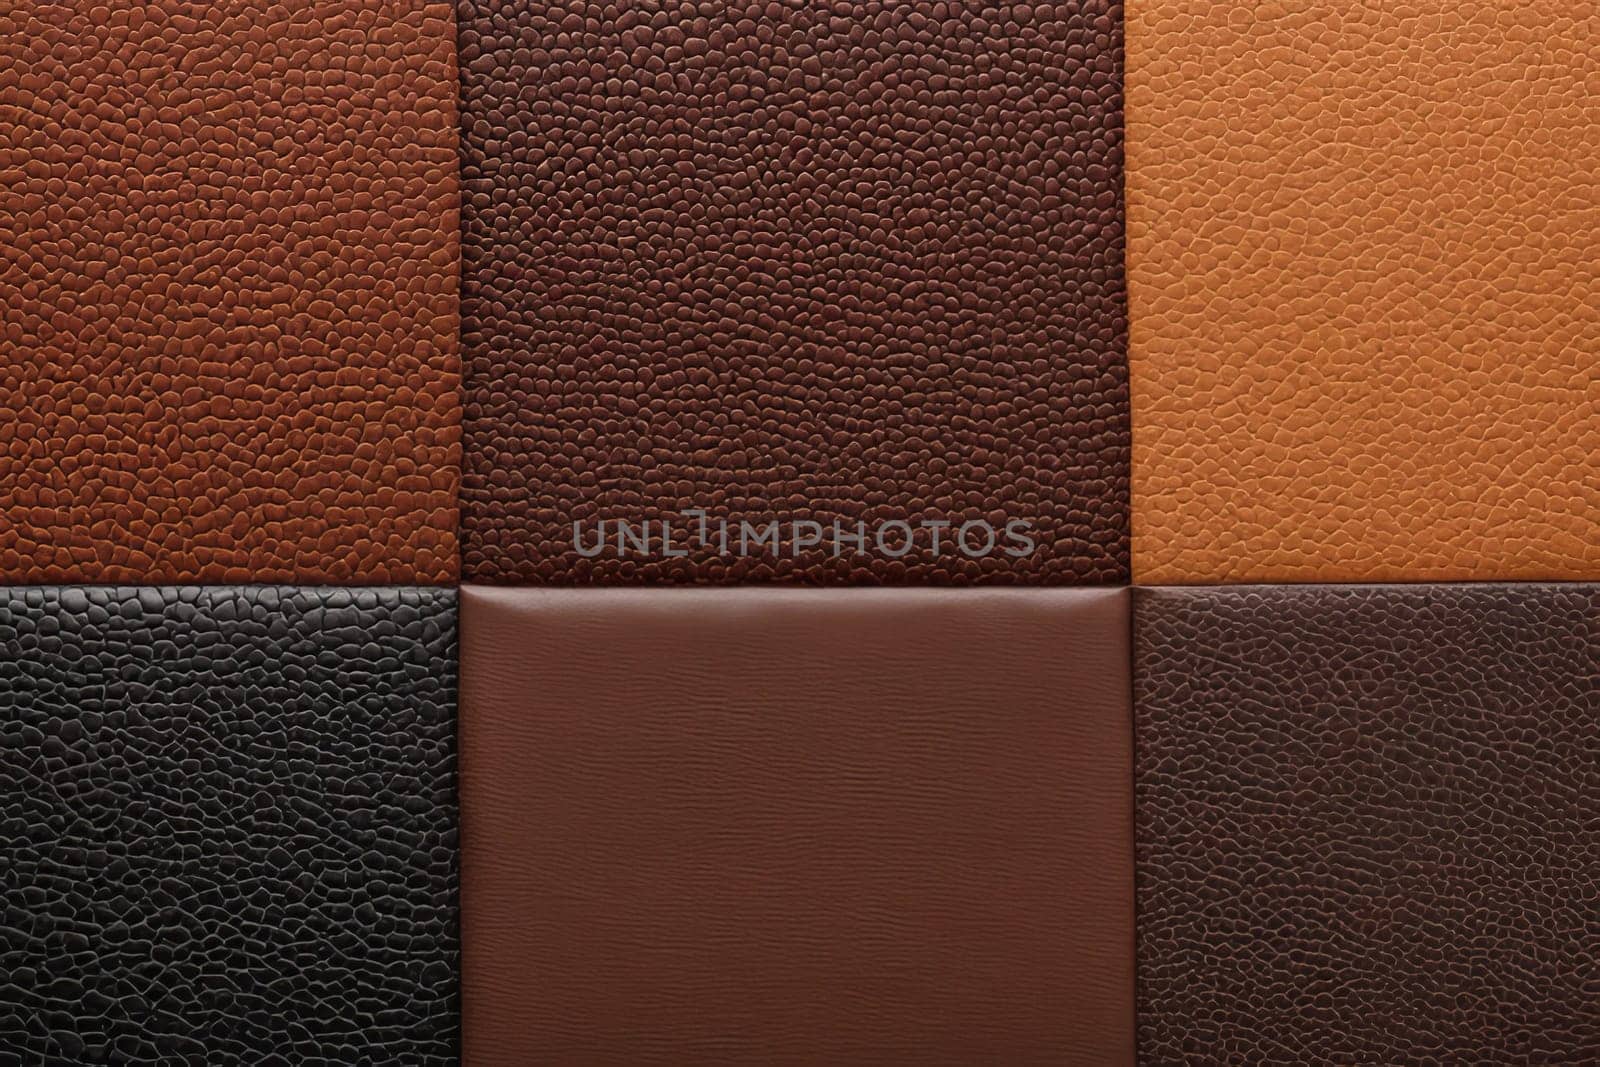 Array of different shades and patterns of brown textured leather, captured in detail